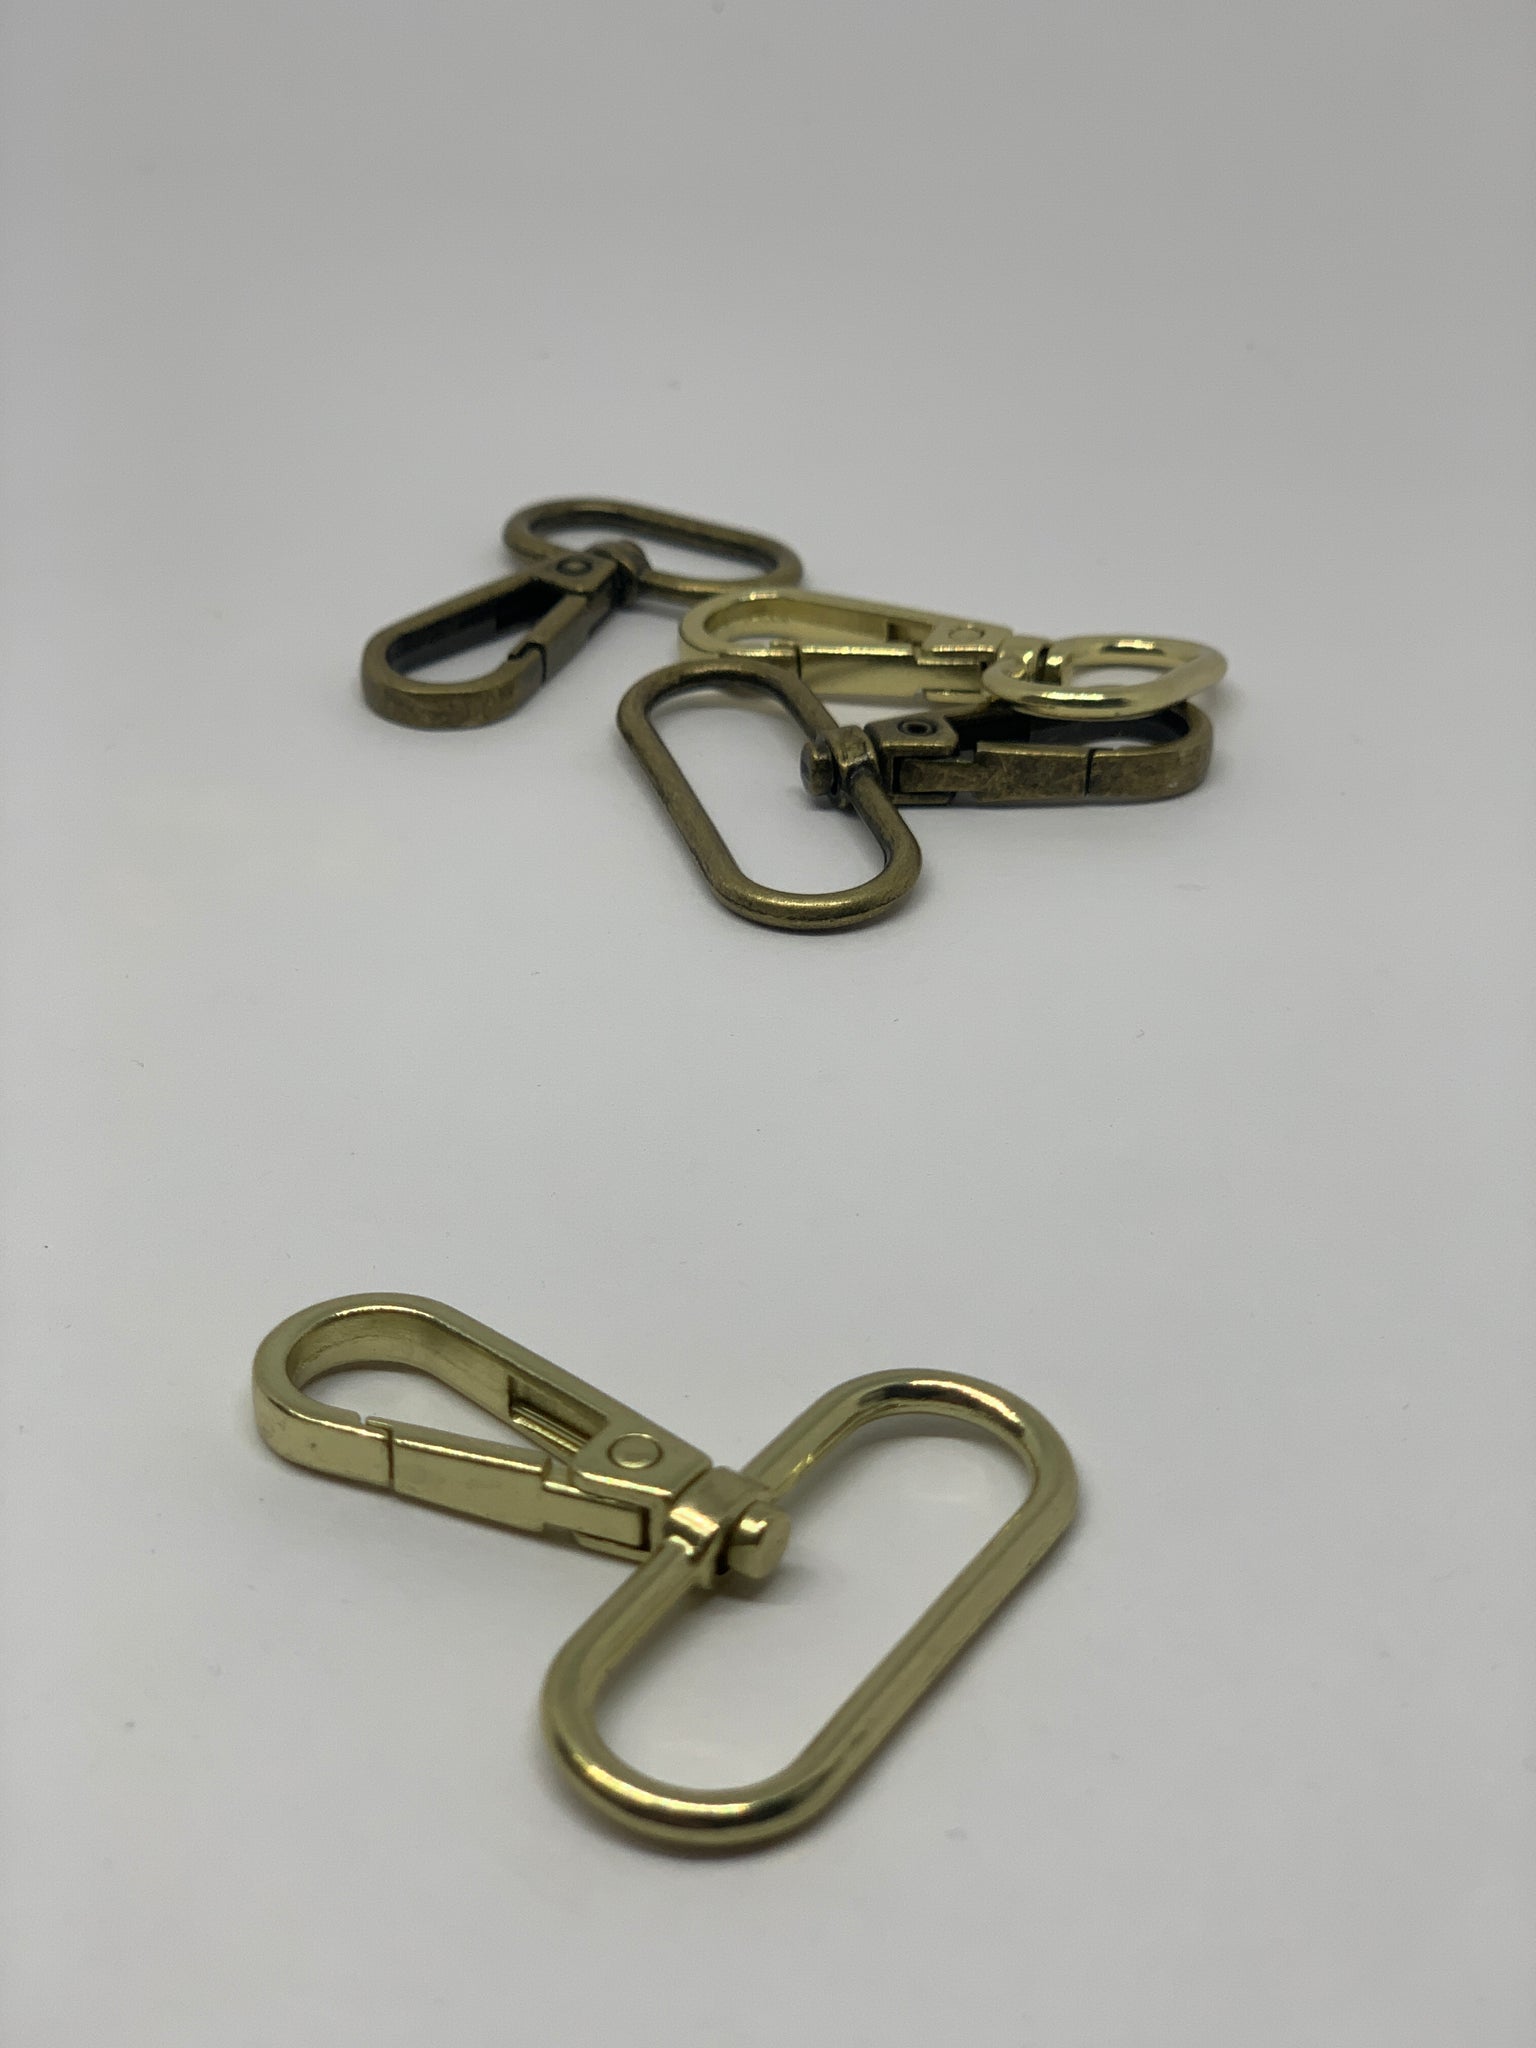 38mm Lobster Swivel Clips – The Sewing Institute